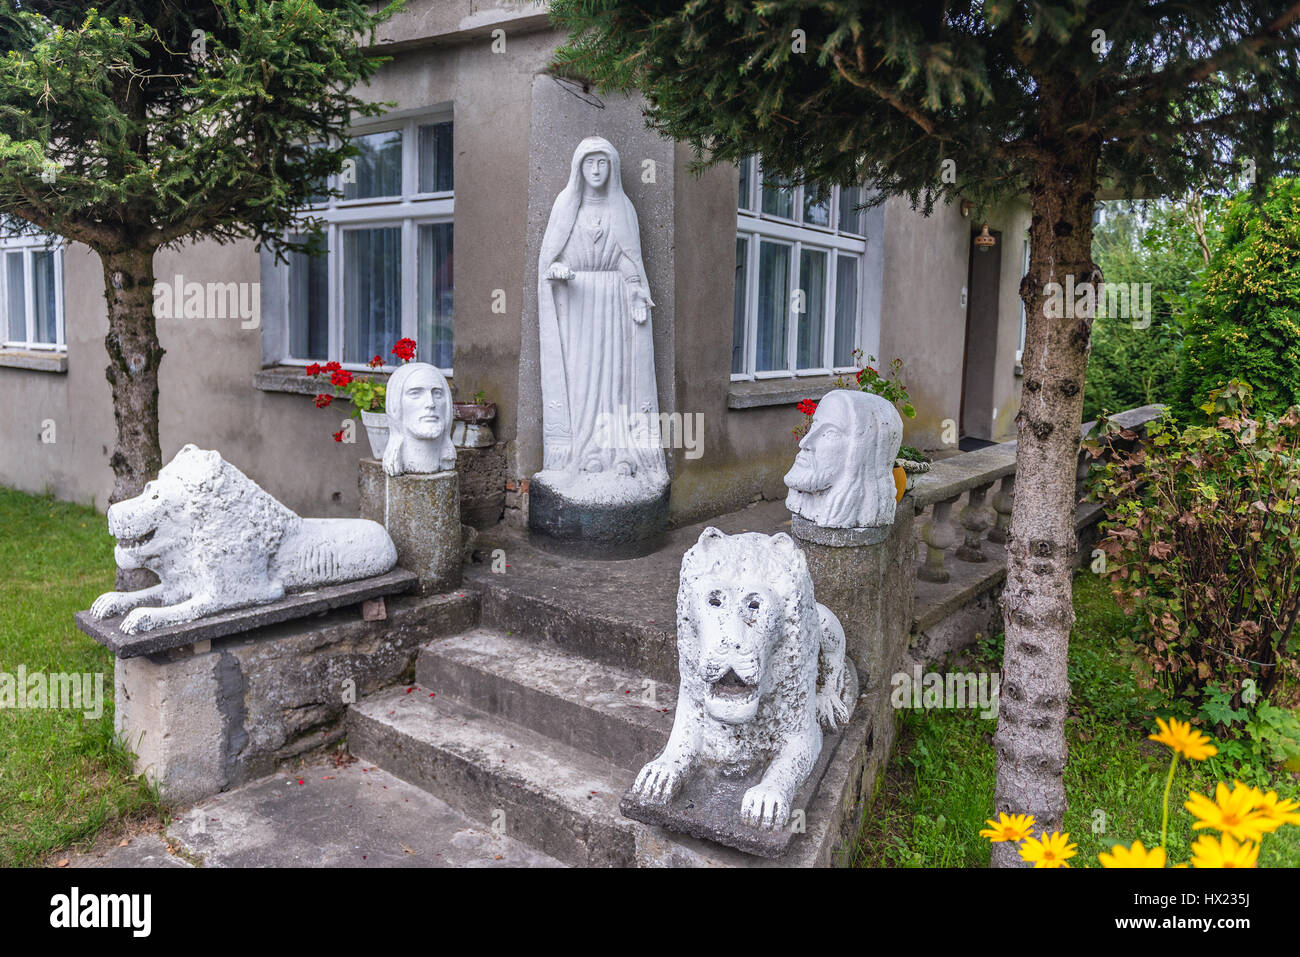 Stone sculptures in front of the house in Lesno village, Chojnice County on Kashubia region of Pomeranian Voivodeship in Poland Stock Photo